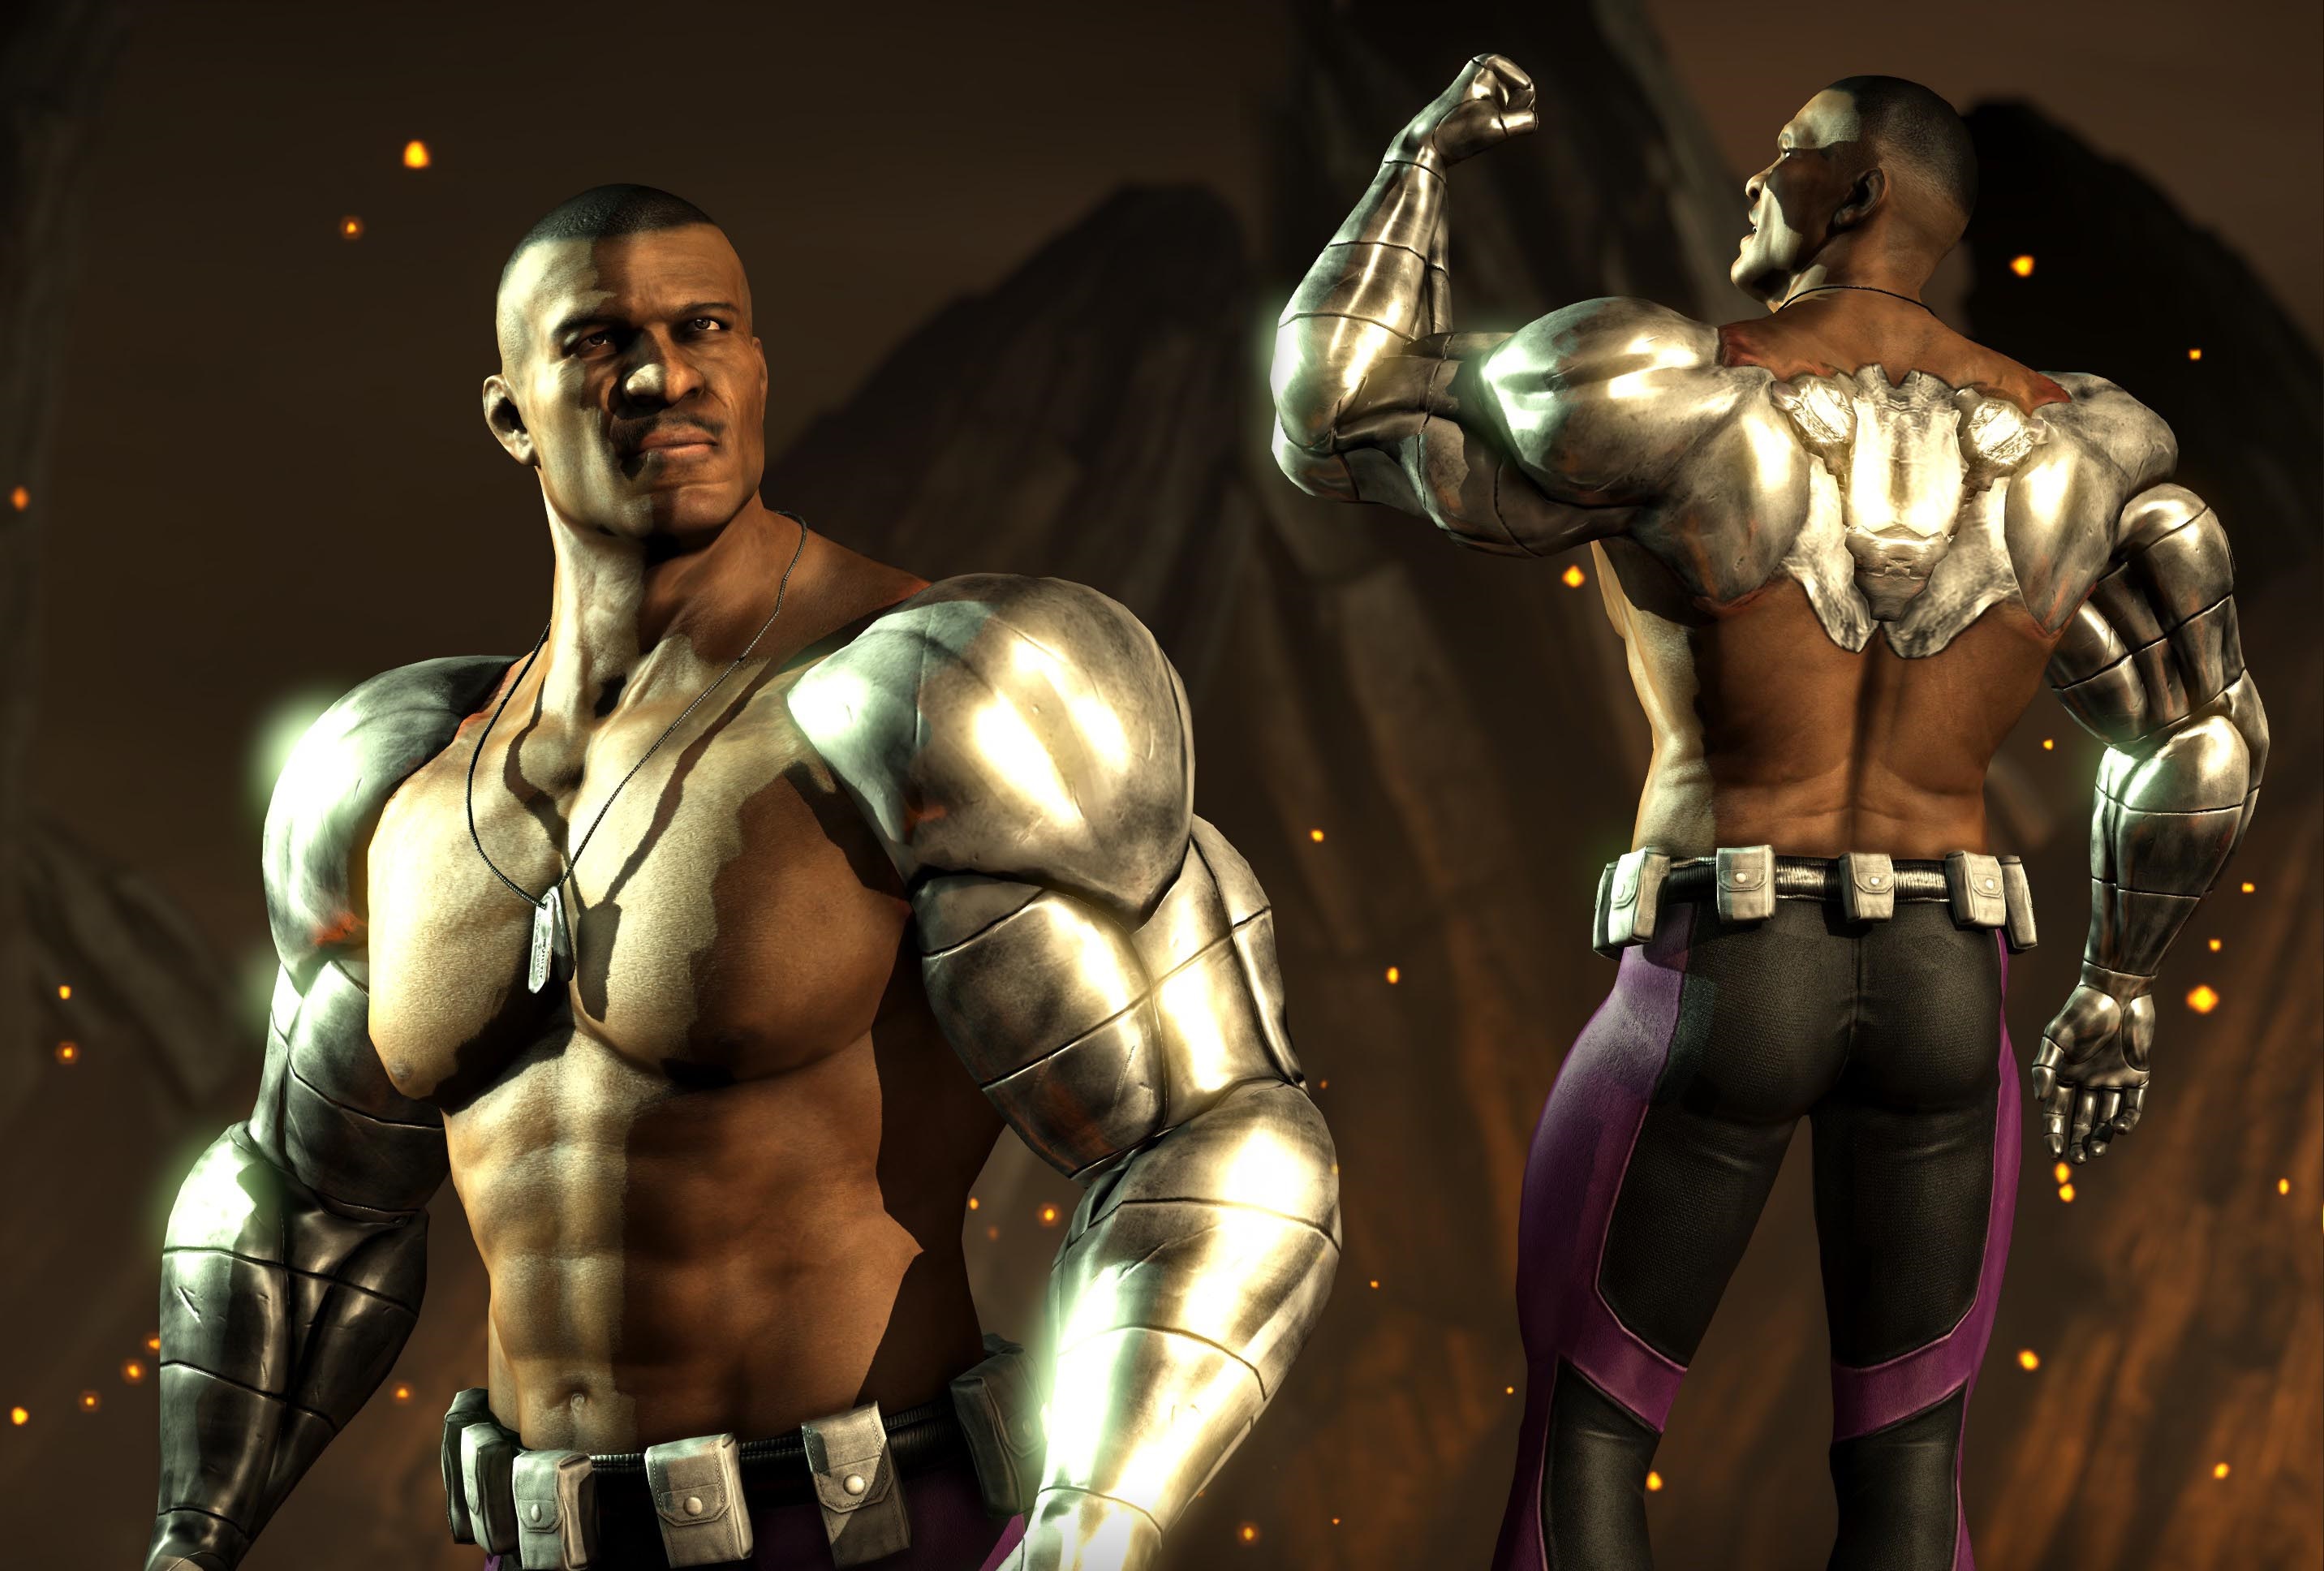 Image 4 - MKX - [ MK2 Skin Pack ] by King Kolossos mod for 